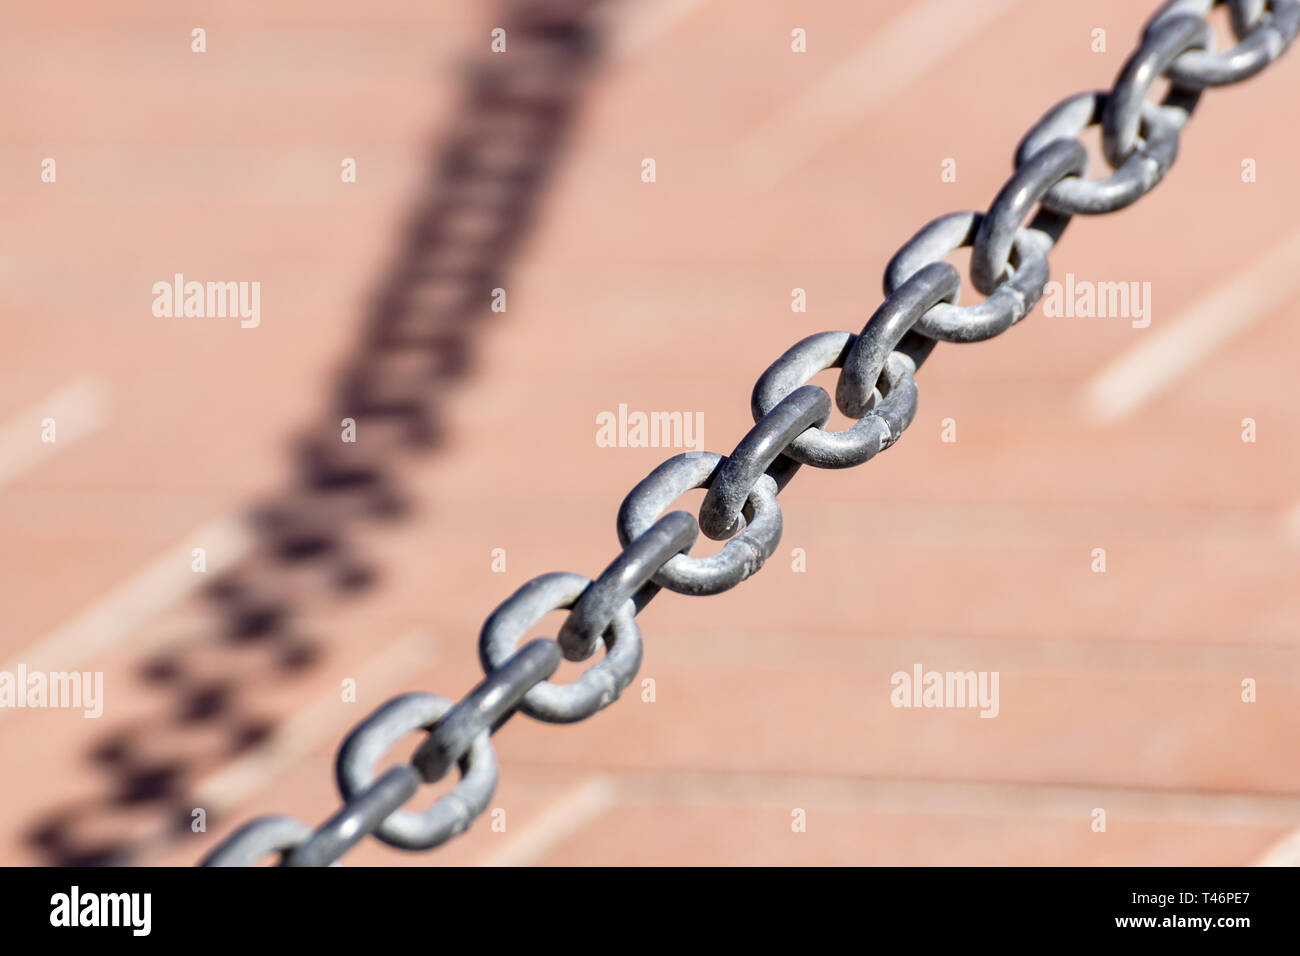 https://c8.alamy.com/comp/T46PE7/old-metal-chain-on-background-with-shadow-T46PE7.jpg